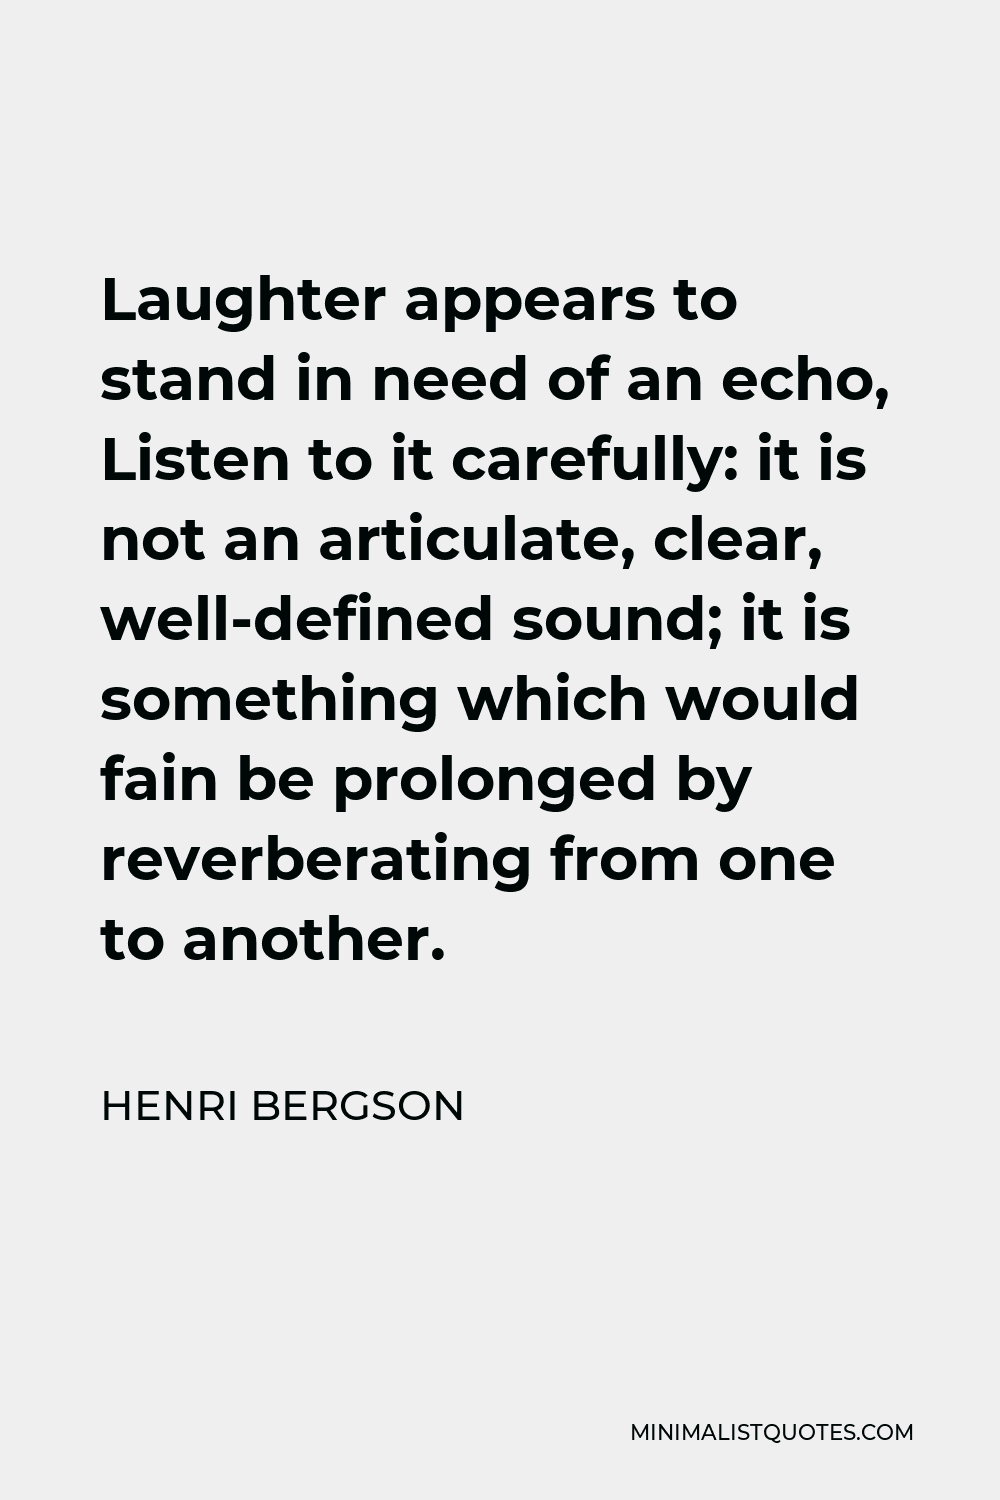 Henri Bergson Quote - Laughter appears to stand in need of an echo, Listen to it carefully: it is not an articulate, clear, well-defined sound; it is something which would fain be prolonged by reverberating from one to another.